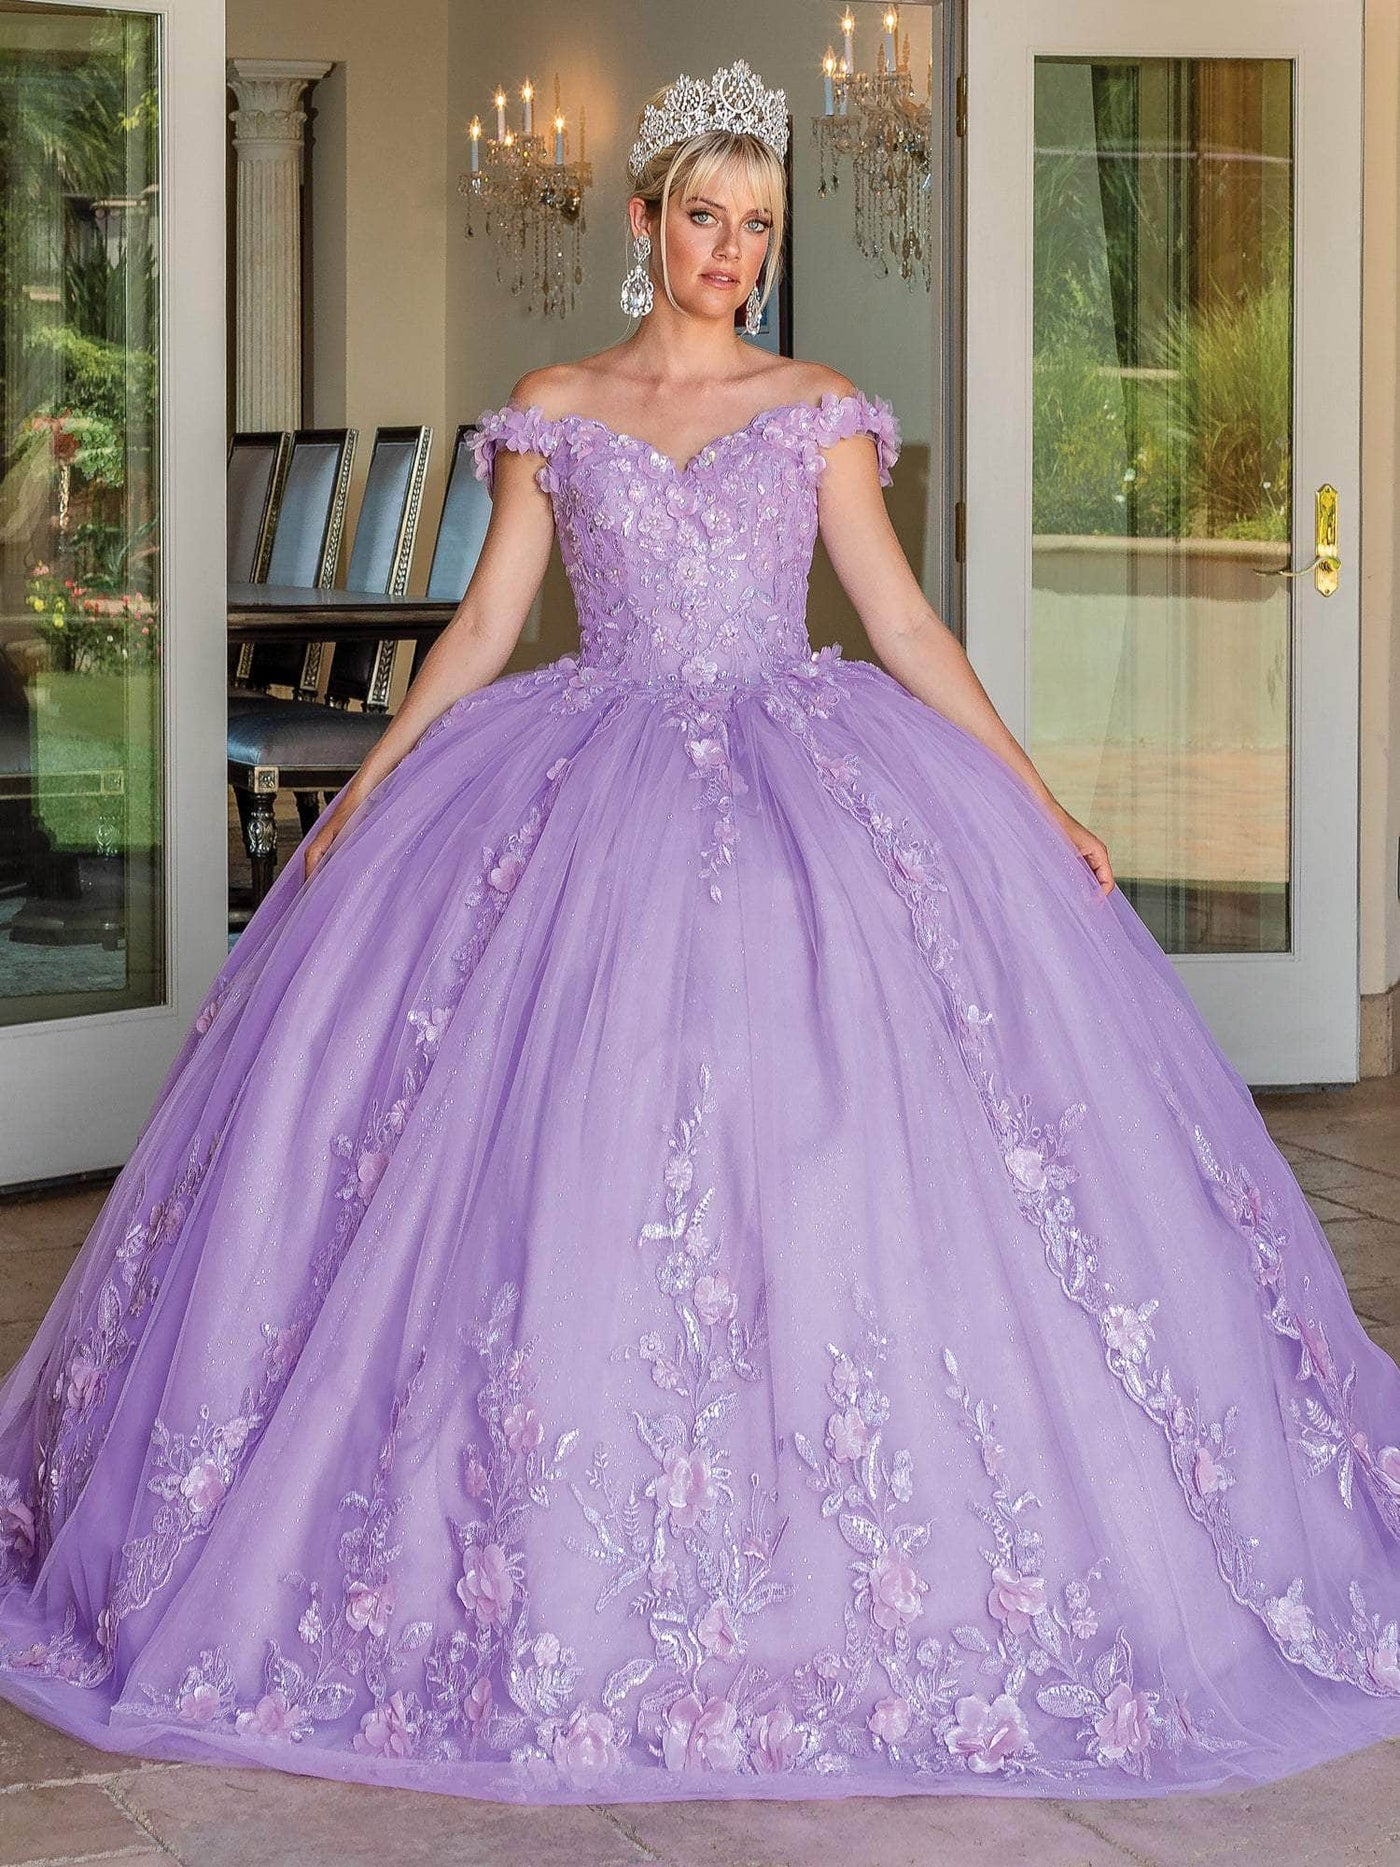 Dancing Queen 1698 - Embellished Quinceanera Ballgown Special Occasion Dress